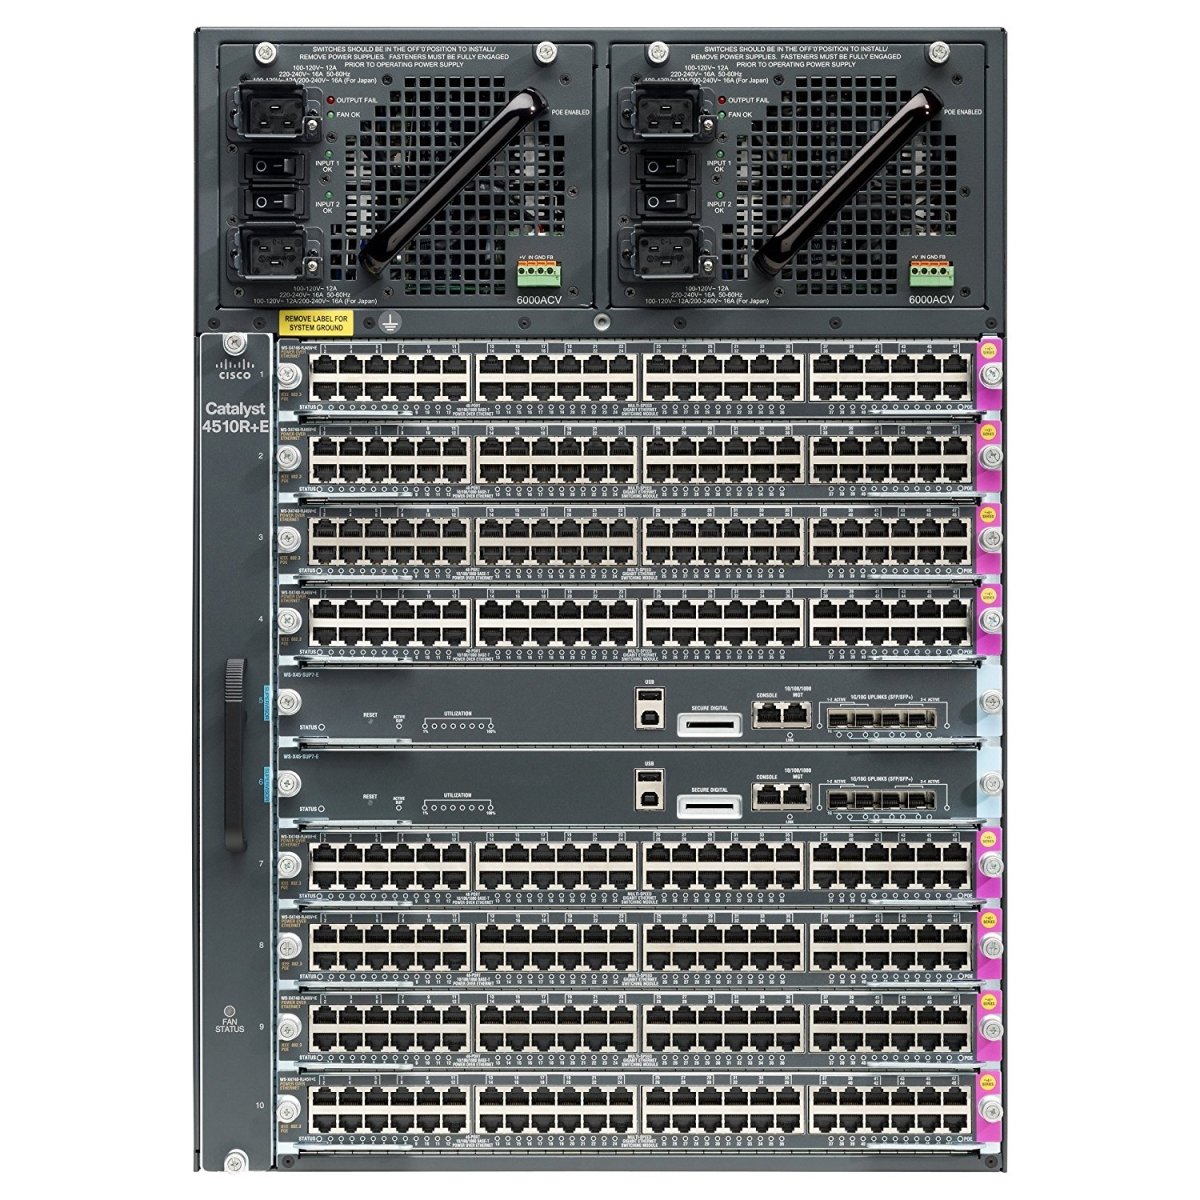 CATALYST 4500E 10 SLOT CHASSIS